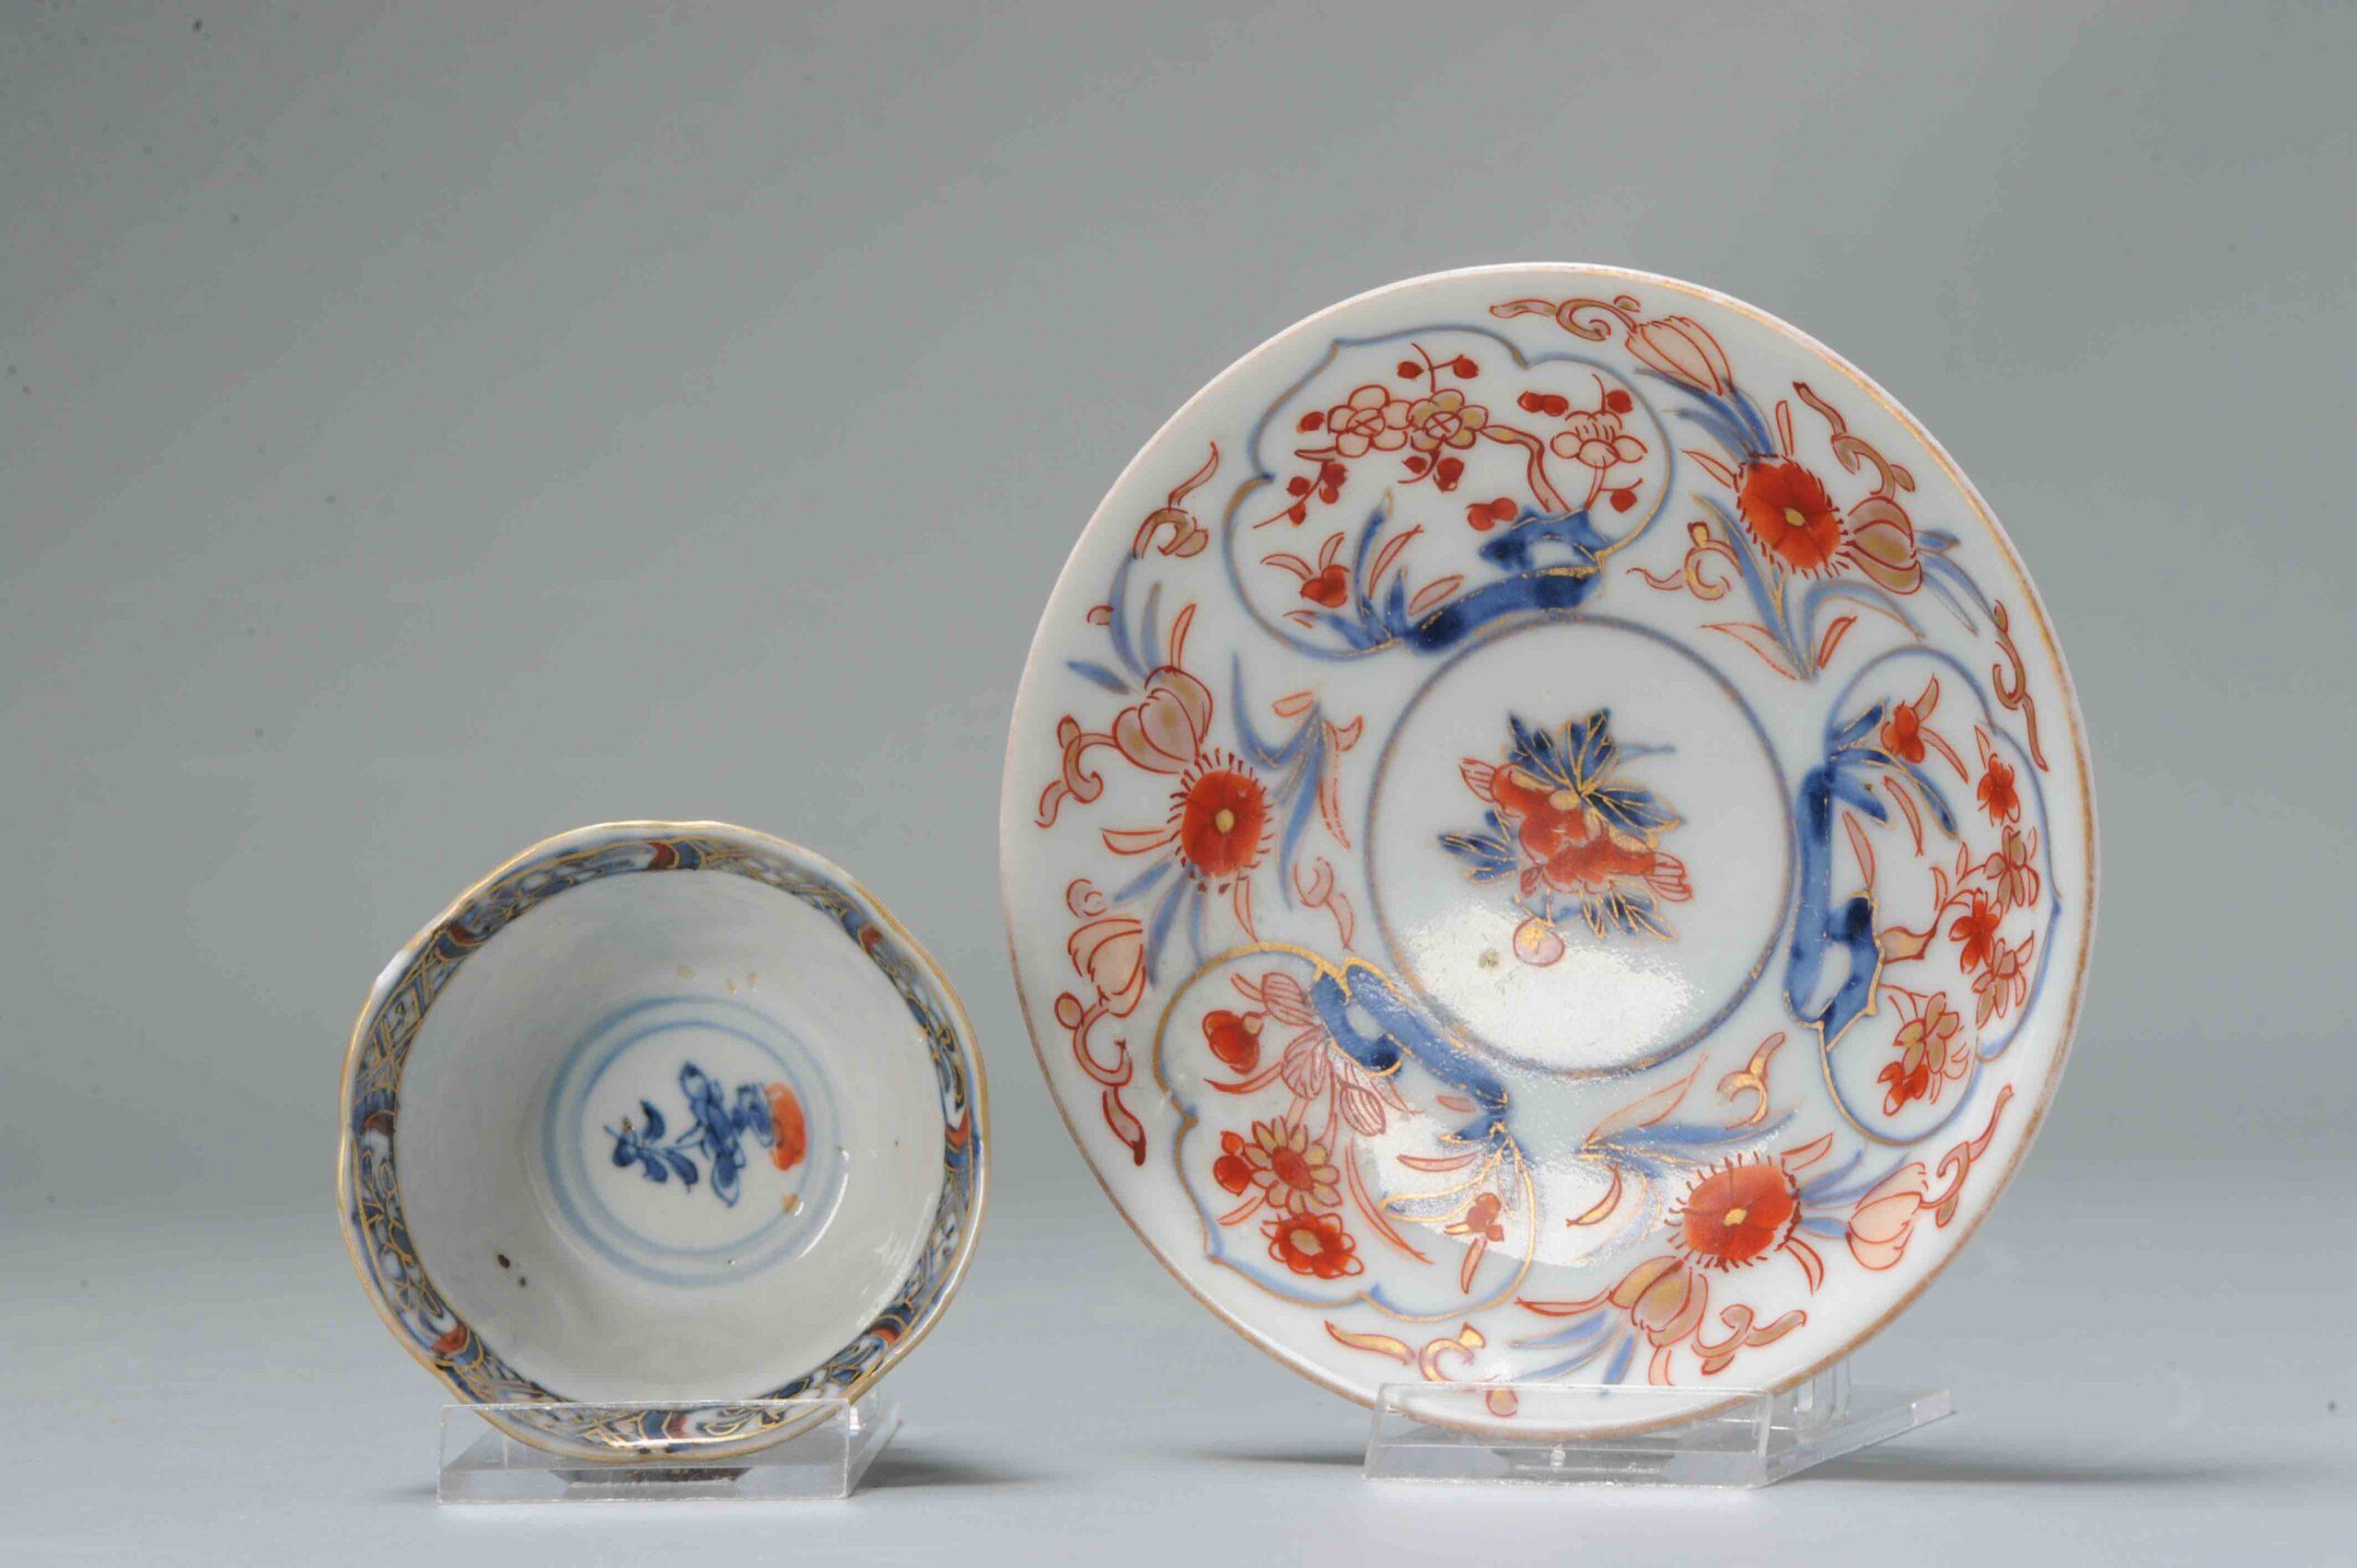 Antique Japanese/Chinese Porcelain Kangxi Period Tea Bowl Floral Imari In Good Condition For Sale In Amsterdam, Noord Holland